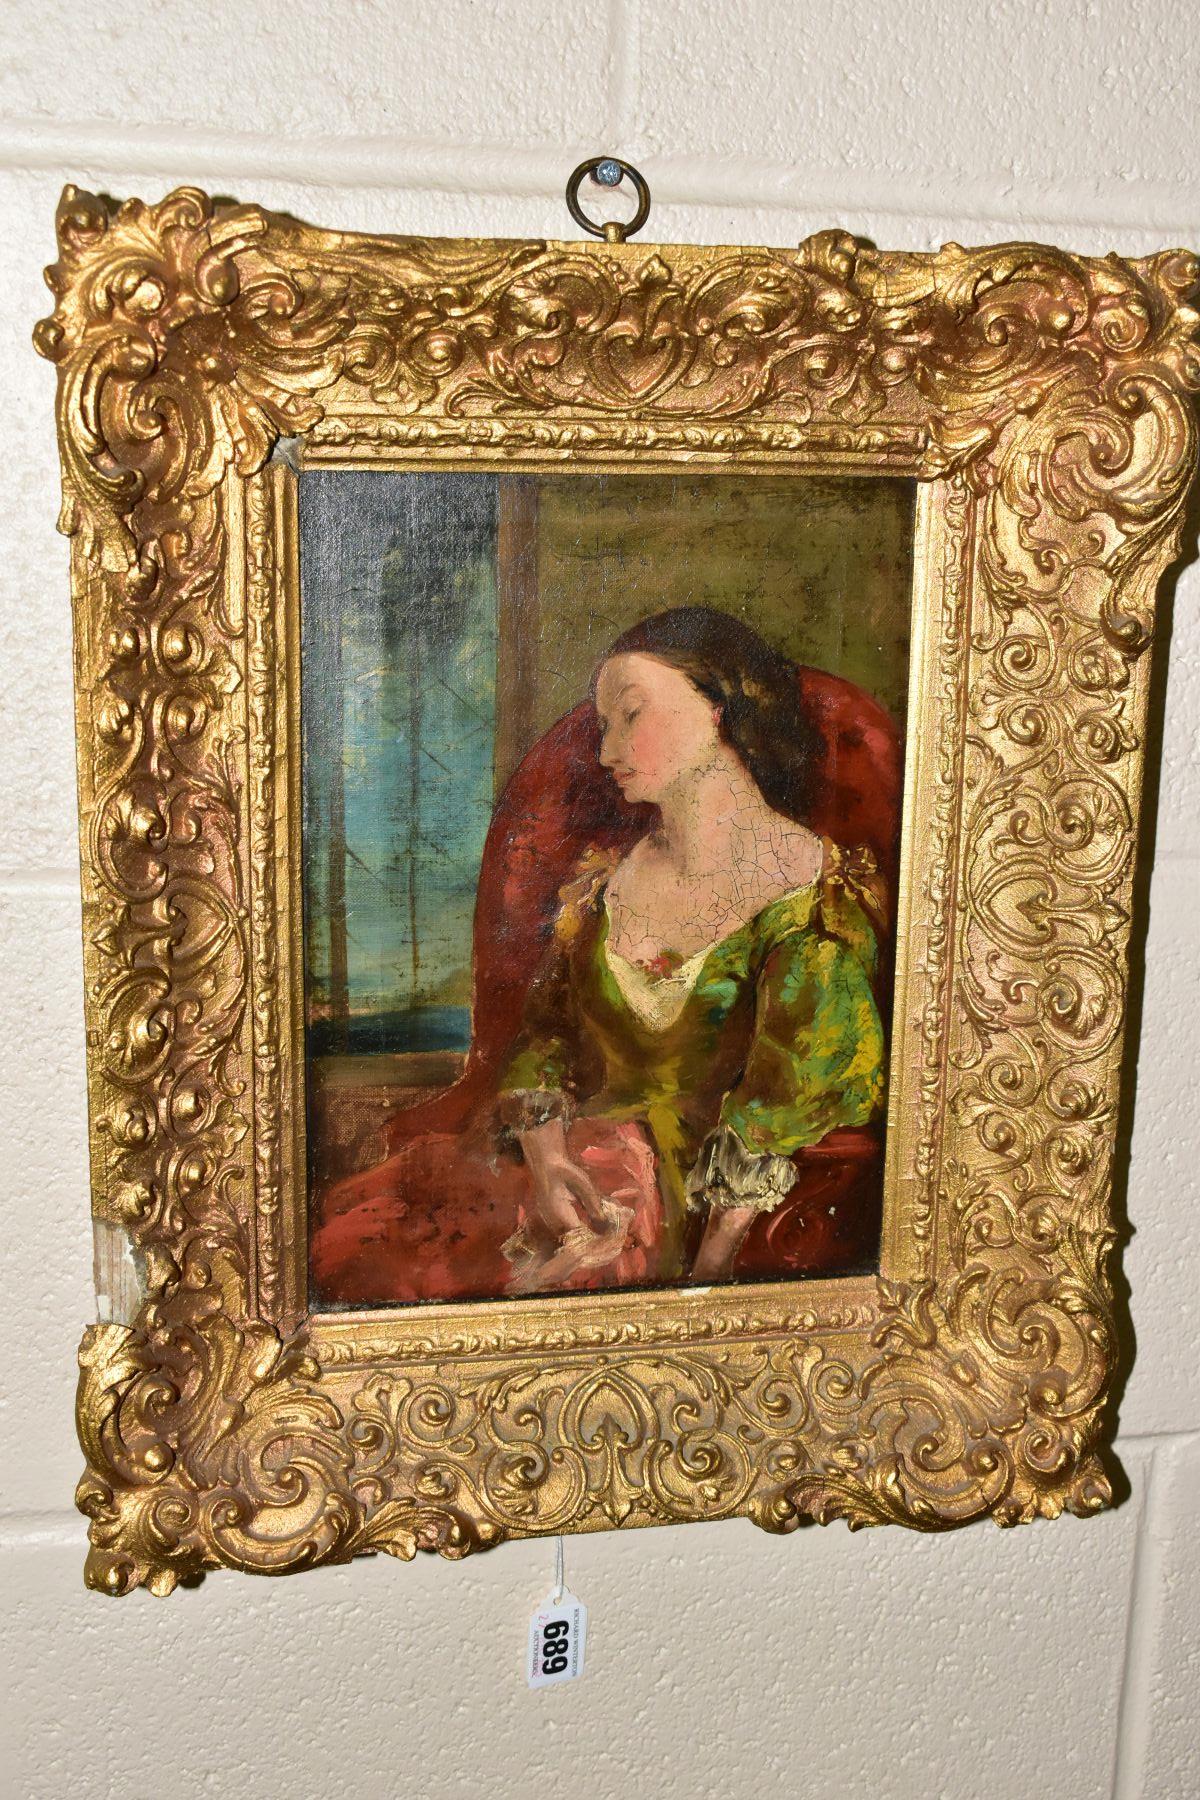 A 19TH CENTURY SEATED PORTRAIT OF A FEMALE FIGURE, unsigned oil on canvas, approximate size 28cm x